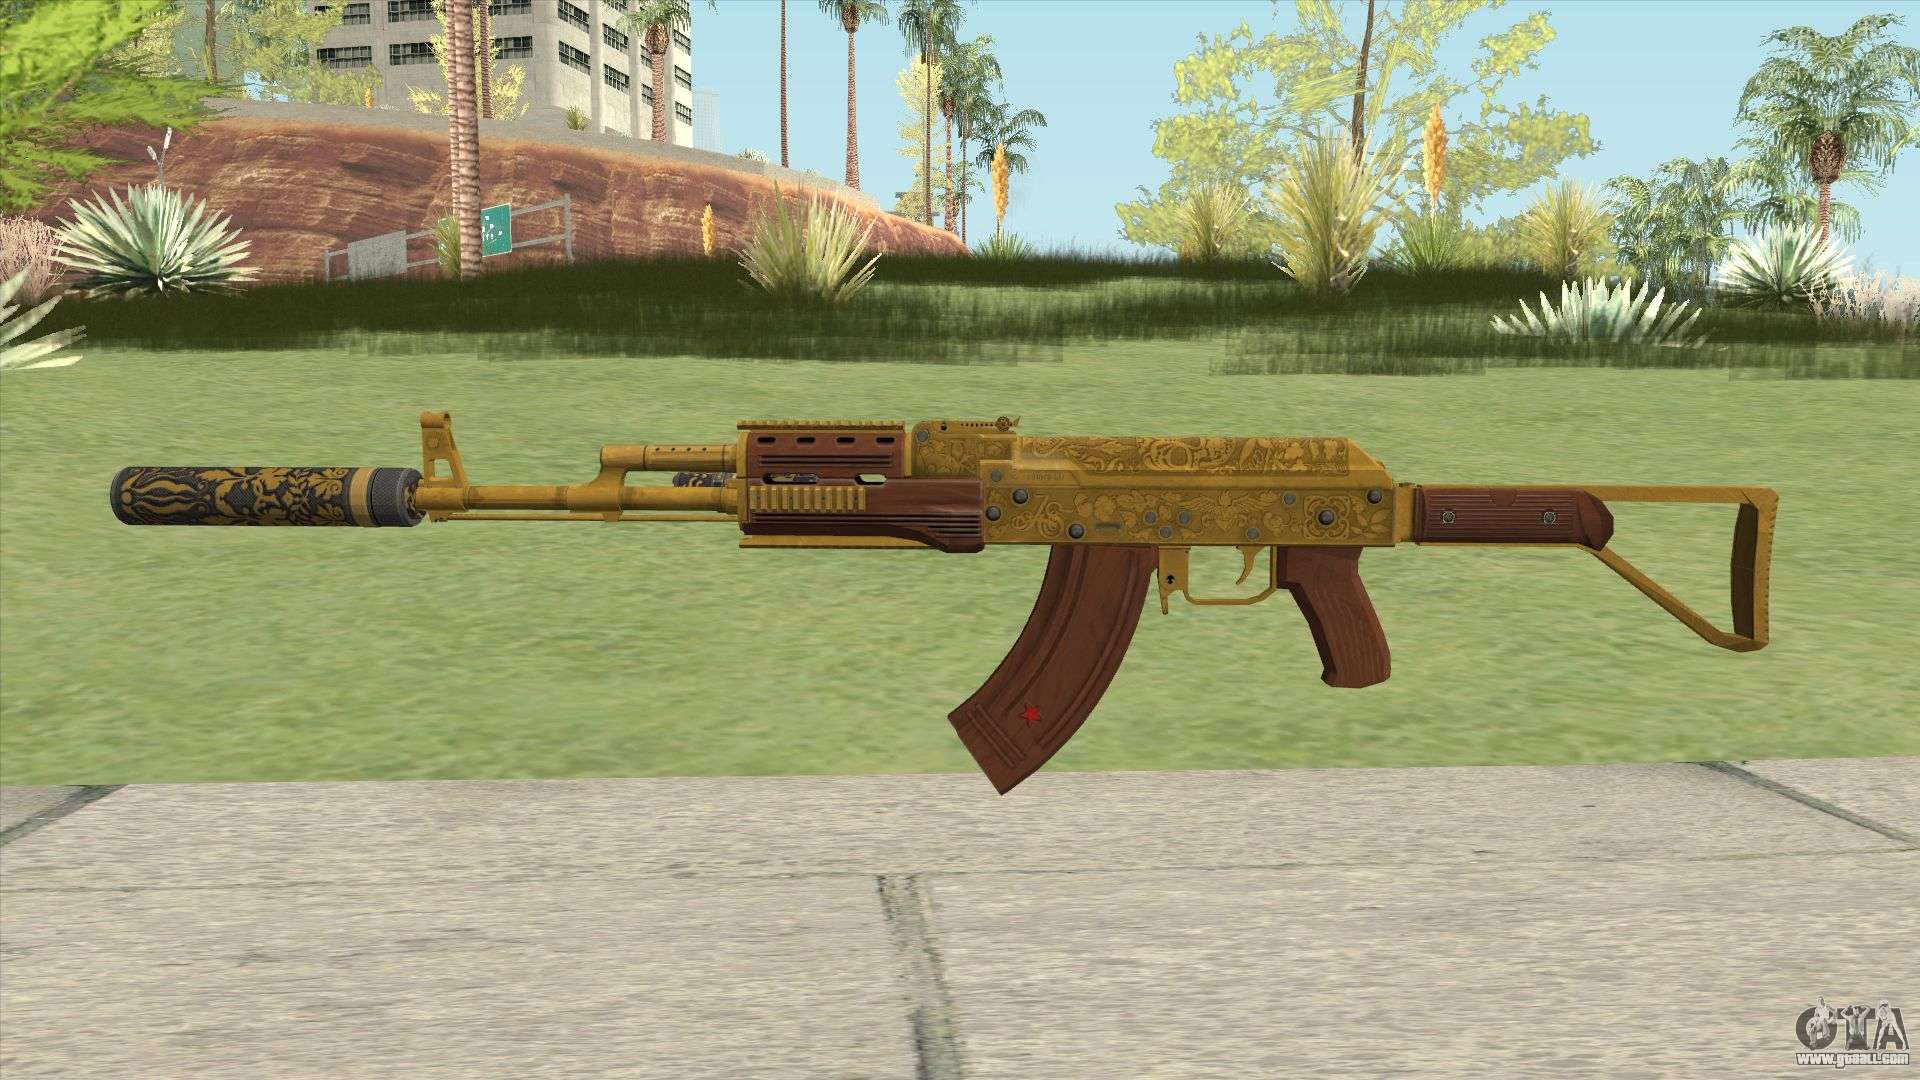 Assault Rifle GTA V (Two Attachments V9) for GTA San Andreas